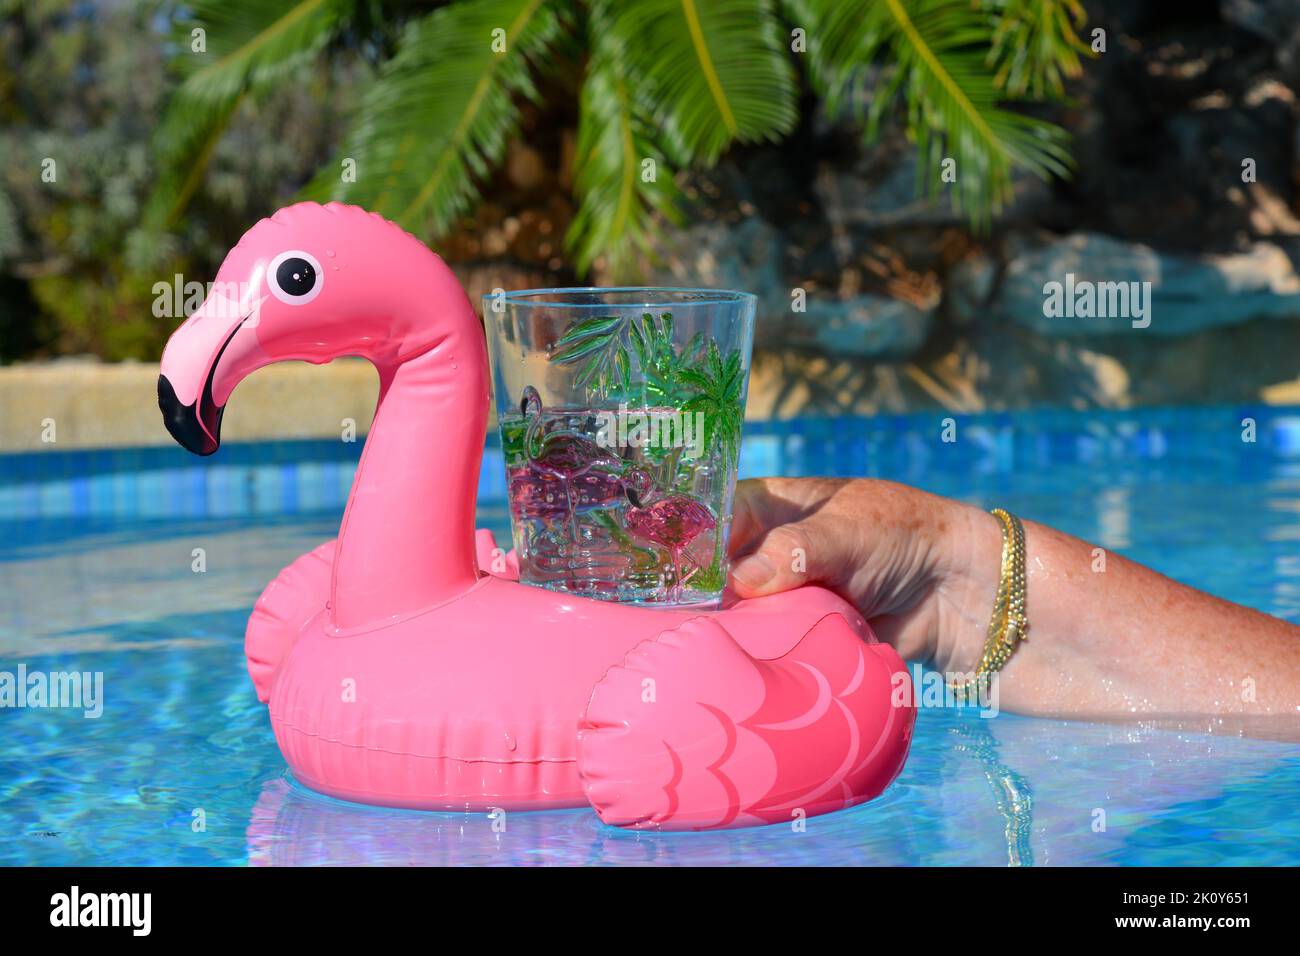 Refreshing drink in woman's hand, in bright pink flamingo glass and holder floating in swimming pool Stock Photo